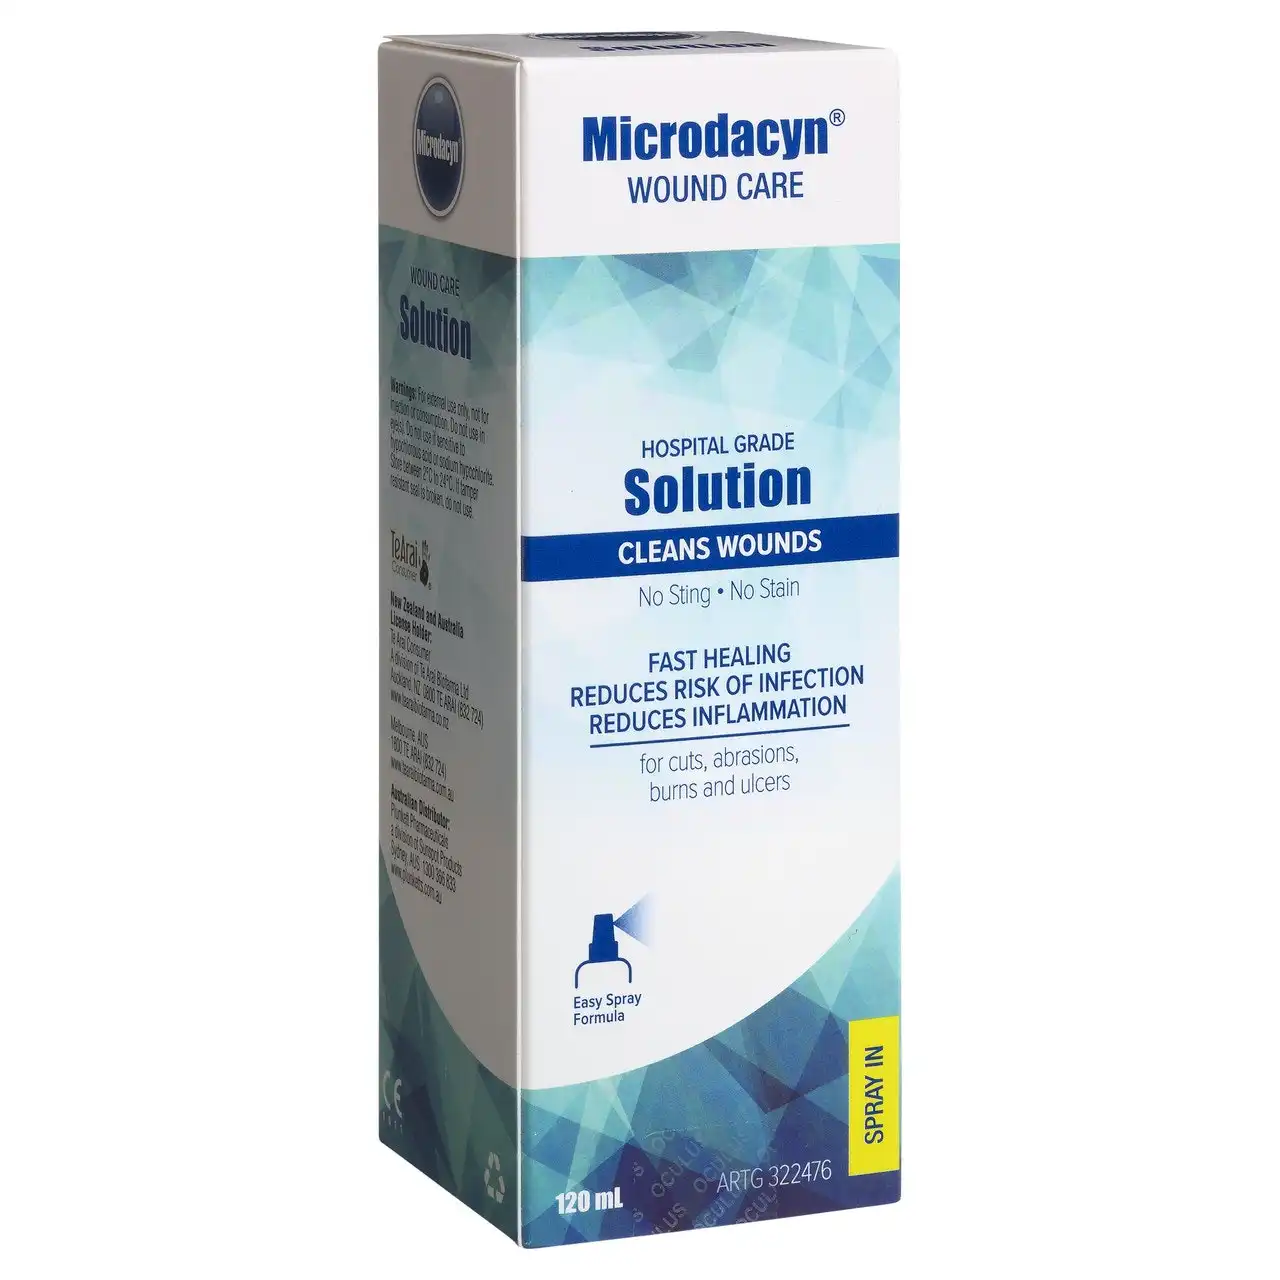 Microdacyn Wound Care Solution 120mL